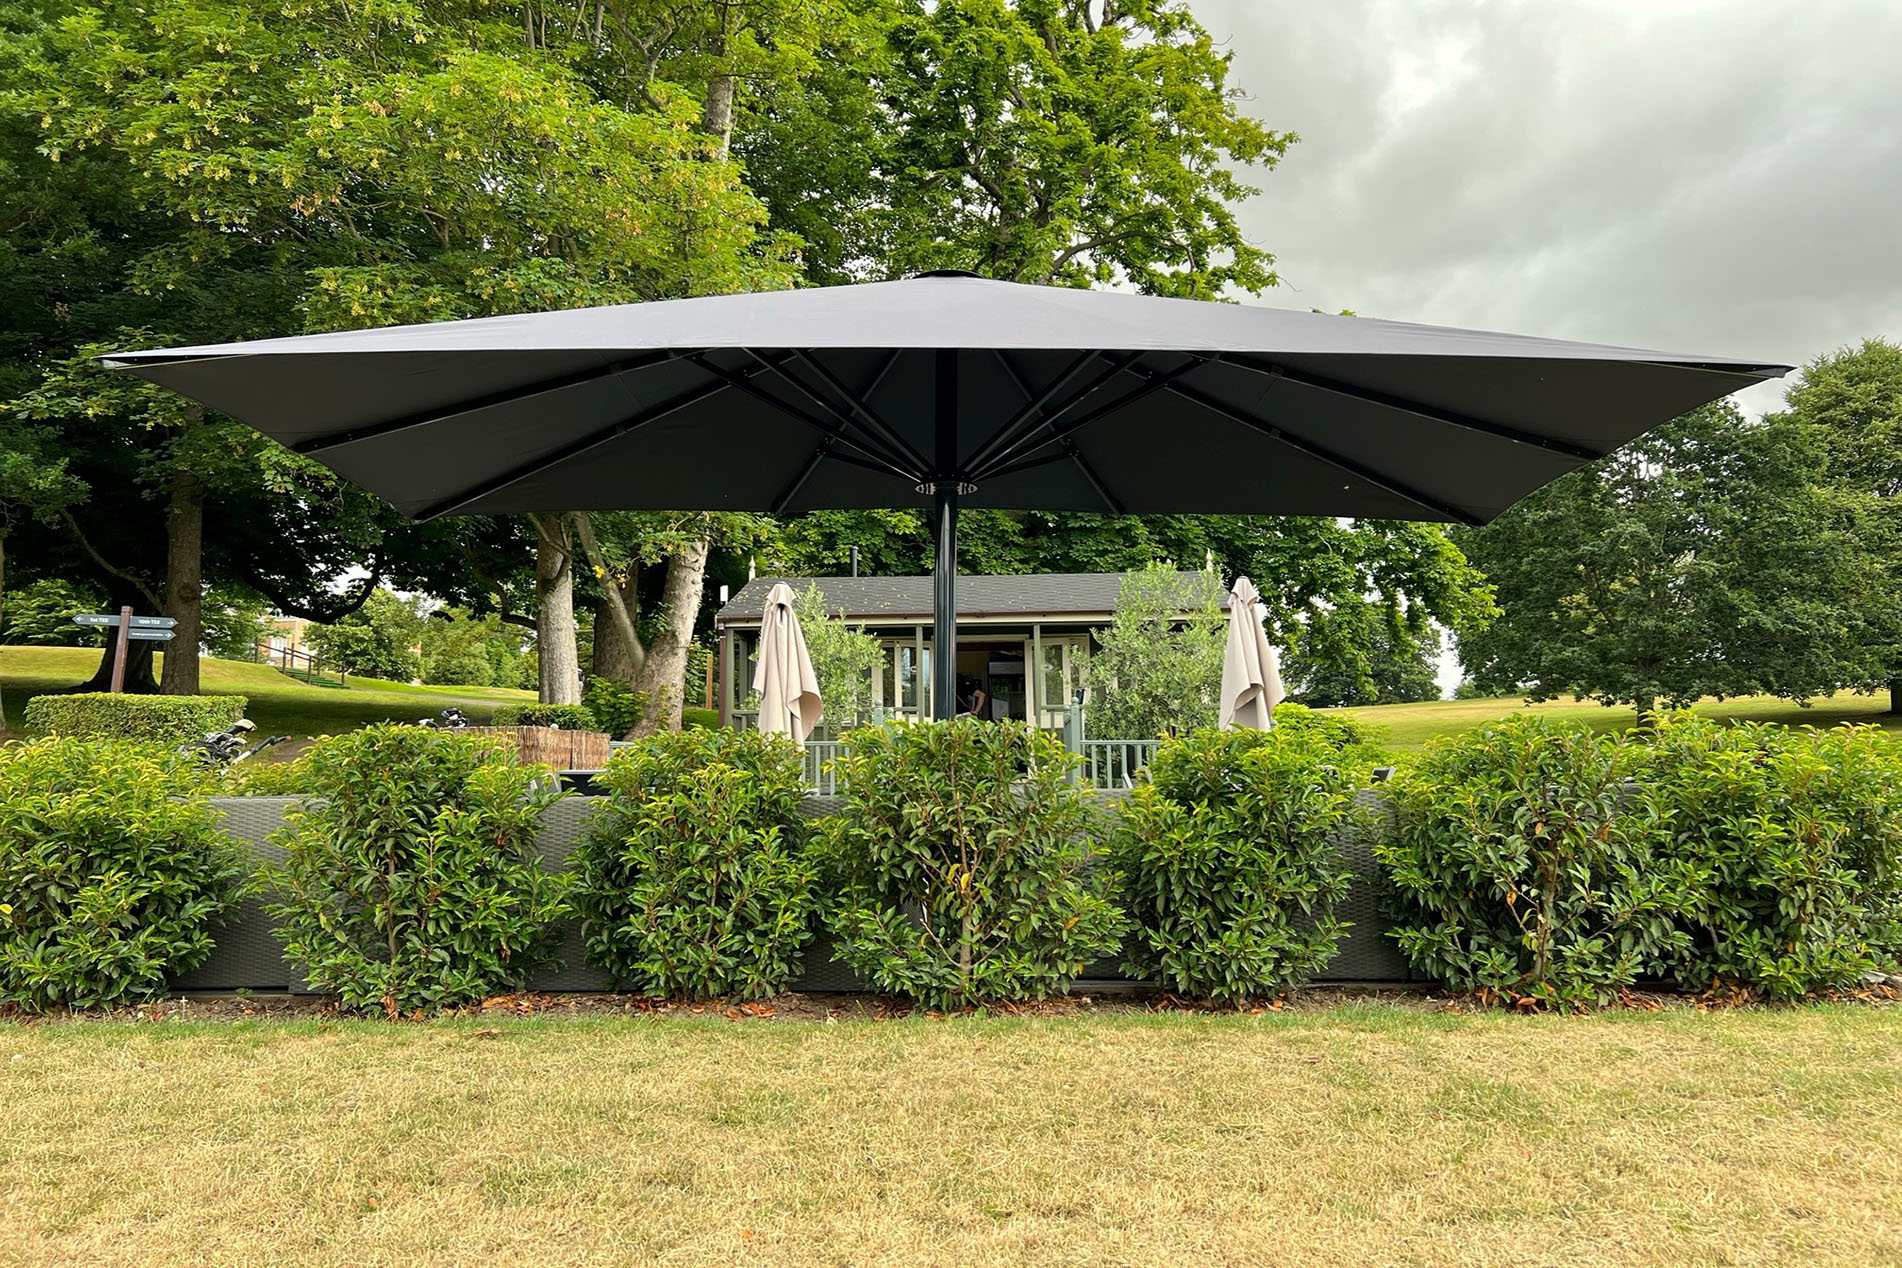 Tempest Grand Commercial Parasols East Herts Golf SHADEmakers UK